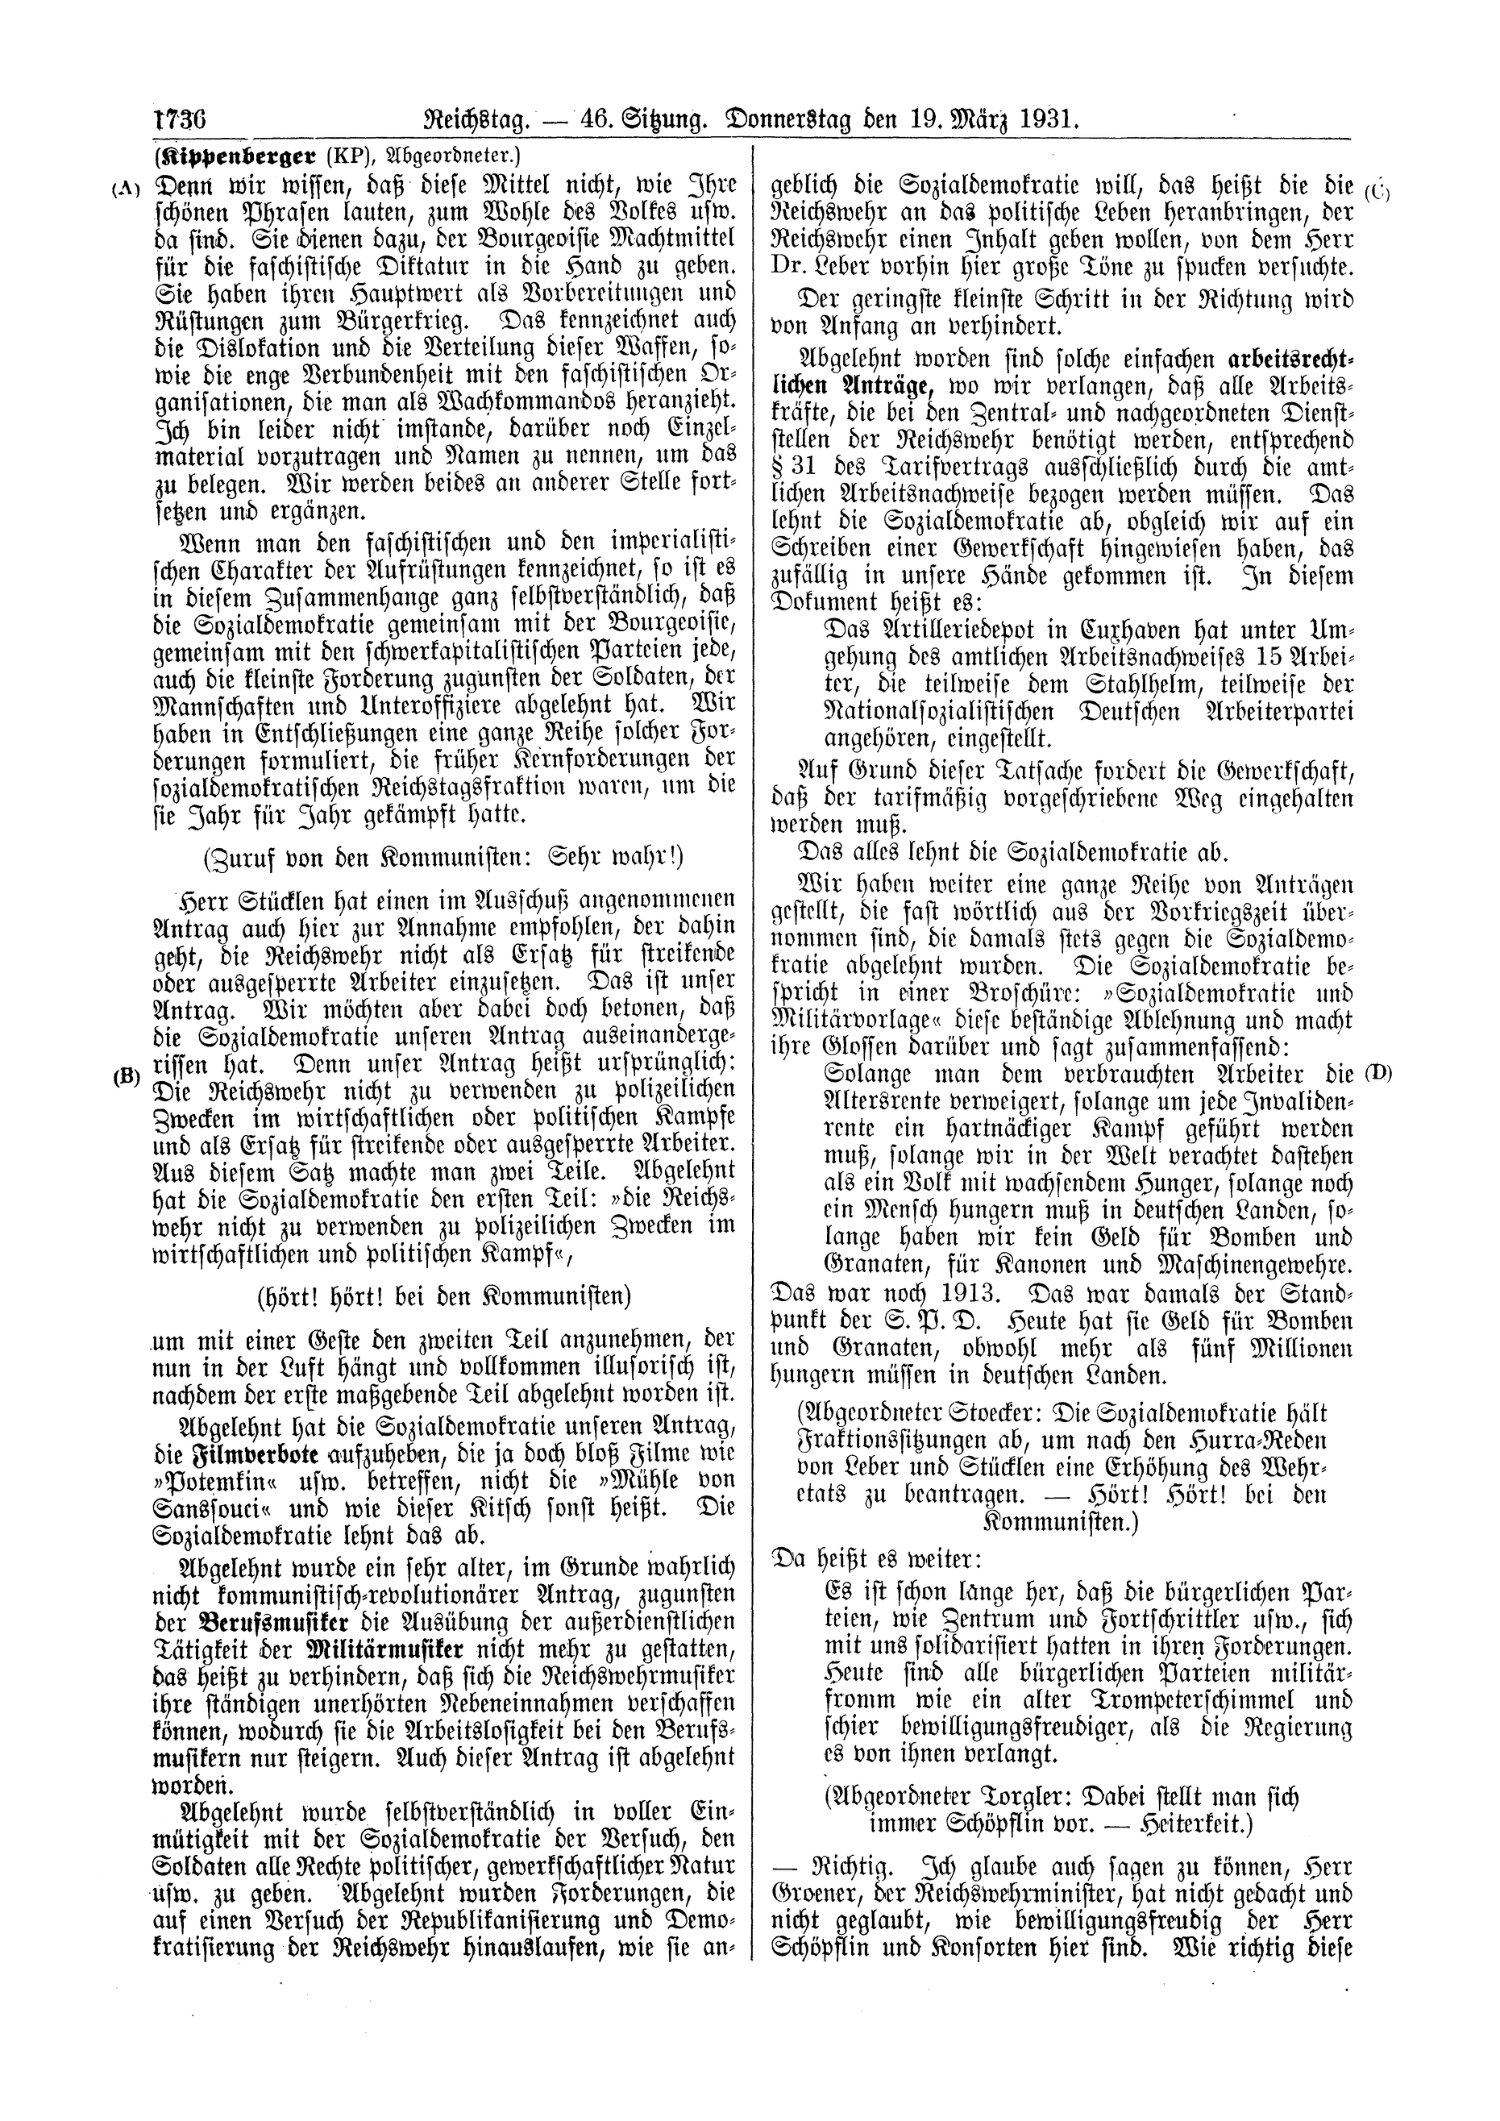 Scan of page 1736